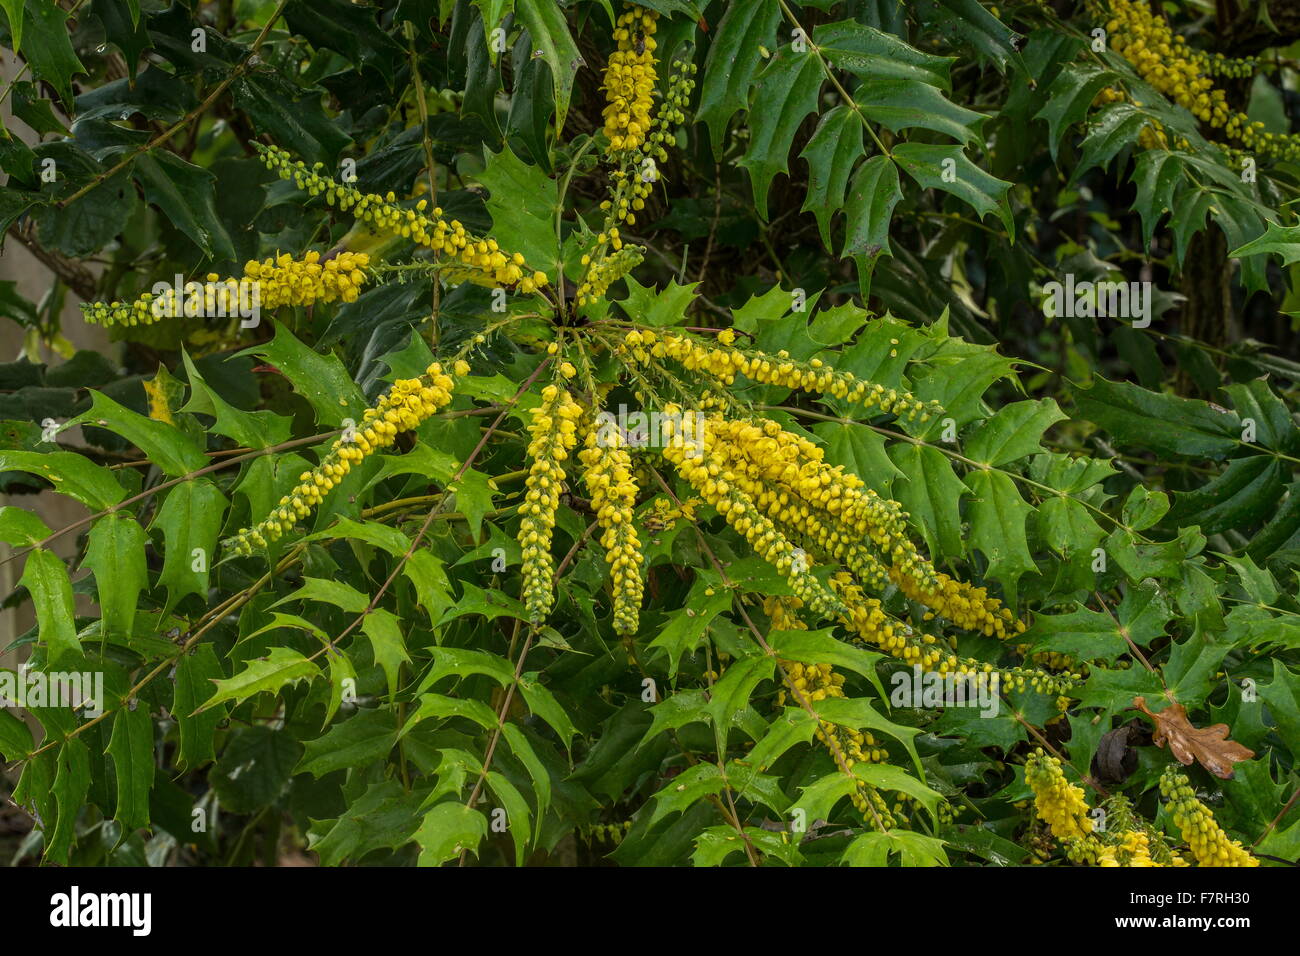 Japanese holly-grape, Mahonia japonica shrubs in flower in early winter. Hampshire. Stock Photo